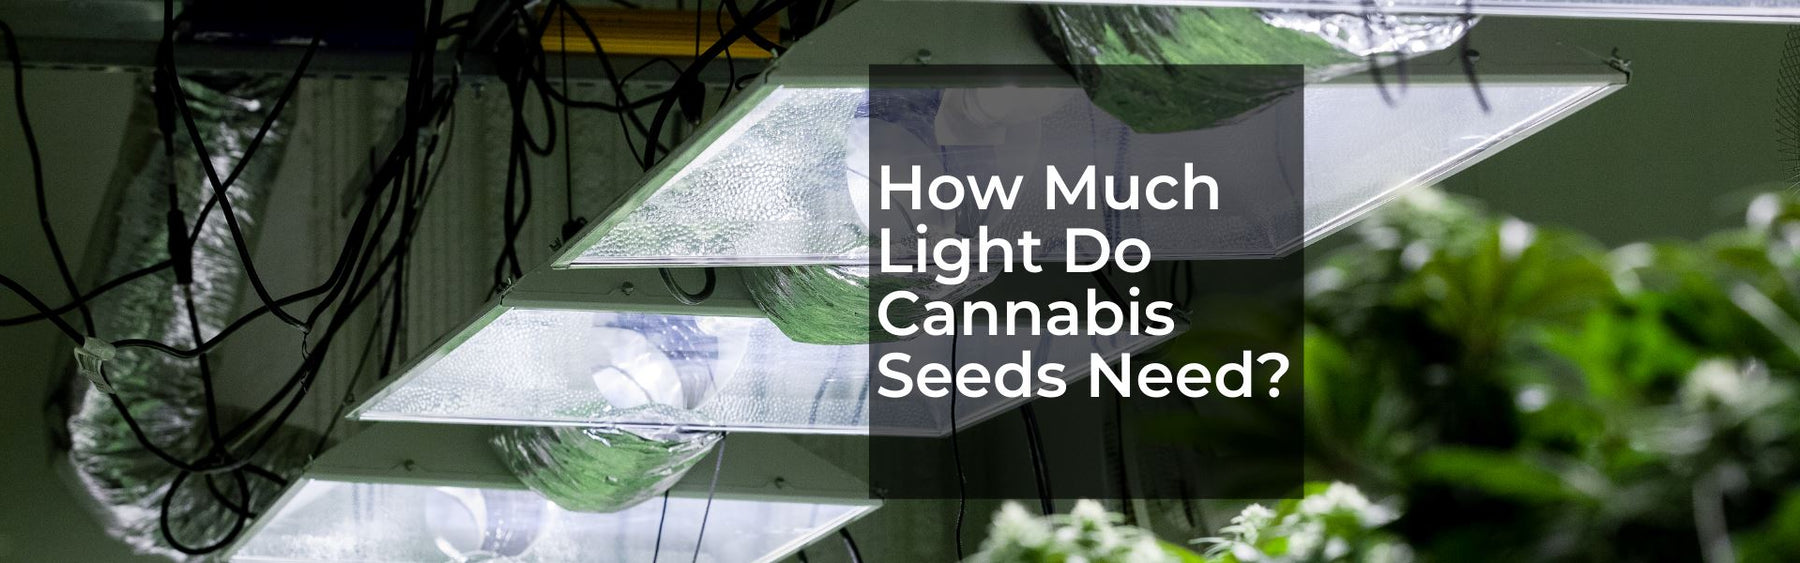 How much light to I need to get my seeds germinating and growing